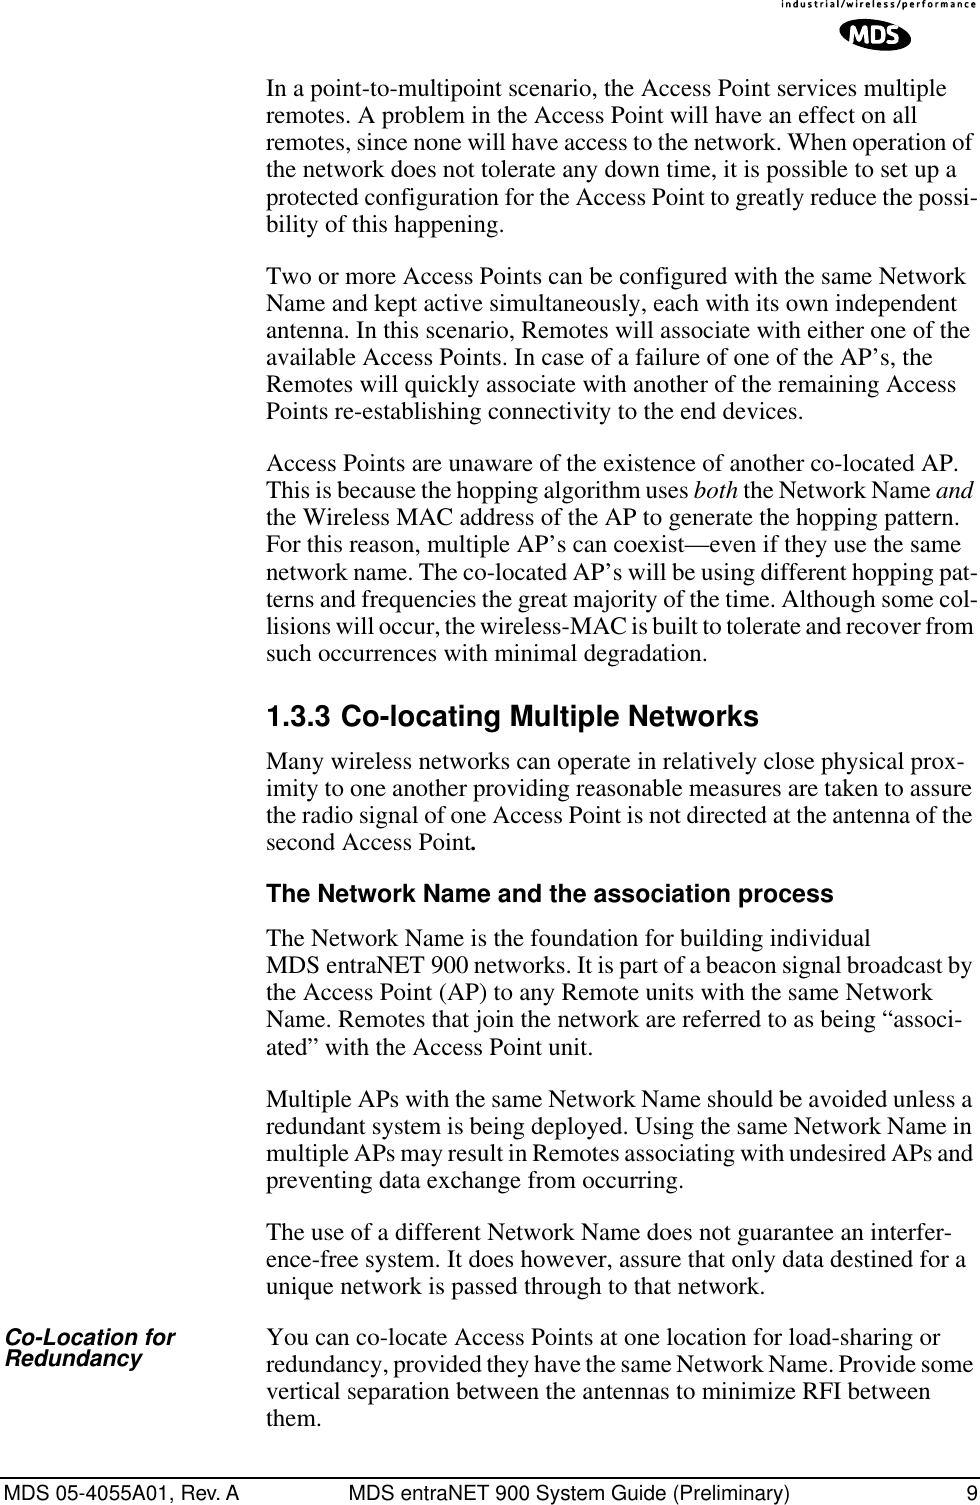  MDS 05-4055A01, Rev. A MDS entraNET 900 System Guide (Preliminary) 9 In a point-to-multipoint scenario, the Access Point services multiple remotes. A problem in the Access Point will have an effect on all remotes, since none will have access to the network. When operation of the network does not tolerate any down time, it is possible to set up a protected configuration for the Access Point to greatly reduce the possi-bility of this happening.Two or more Access Points can be configured with the same Network Name and kept active simultaneously, each with its own independent antenna. In this scenario, Remotes will associate with either one of the available Access Points. In case of a failure of one of the AP’s, the Remotes will quickly associate with another of the remaining Access Points re-establishing connectivity to the end devices.Access Points are unaware of the existence of another co-located AP. This is because the hopping algorithm uses  both  the Network Name  and the Wireless MAC address of the AP to generate the hopping pattern. For this reason, multiple AP’s can coexist—even if they use the same network name. The co-located AP’s will be using different hopping pat-terns and frequencies the great majority of the time. Although some col-lisions will occur, the wireless-MAC is built to tolerate and recover from such occurrences with minimal degradation.1.3.3 Co-locating Multiple NetworksMany wireless networks can operate in relatively close physical prox-imity to one another providing reasonable measures are taken to assure the radio signal of one Access Point is not directed at the antenna of the second Access Point.The Network Name and the association processThe Network Name is the foundation for building individual MDS entraNET 900 networks. It is part of a beacon signal broadcast by the Access Point (AP) to any Remote units with the same Network Name. Remotes that join the network are referred to as being “associ-ated” with the Access Point unit. Multiple APs with the same Network Name should be avoided unless a redundant system is being deployed. Using the same Network Name in multiple APs may result in Remotes associating with undesired APs and preventing data exchange from occurring.The use of a different Network Name does not guarantee an interfer-ence-free system. It does however, assure that only data destined for a unique network is passed through to that network.Co-Location for Redundancy You can co-locate Access Points at one location for load-sharing or redundancy, provided they have the same Network Name. Provide some vertical separation between the antennas to minimize RFI between them.